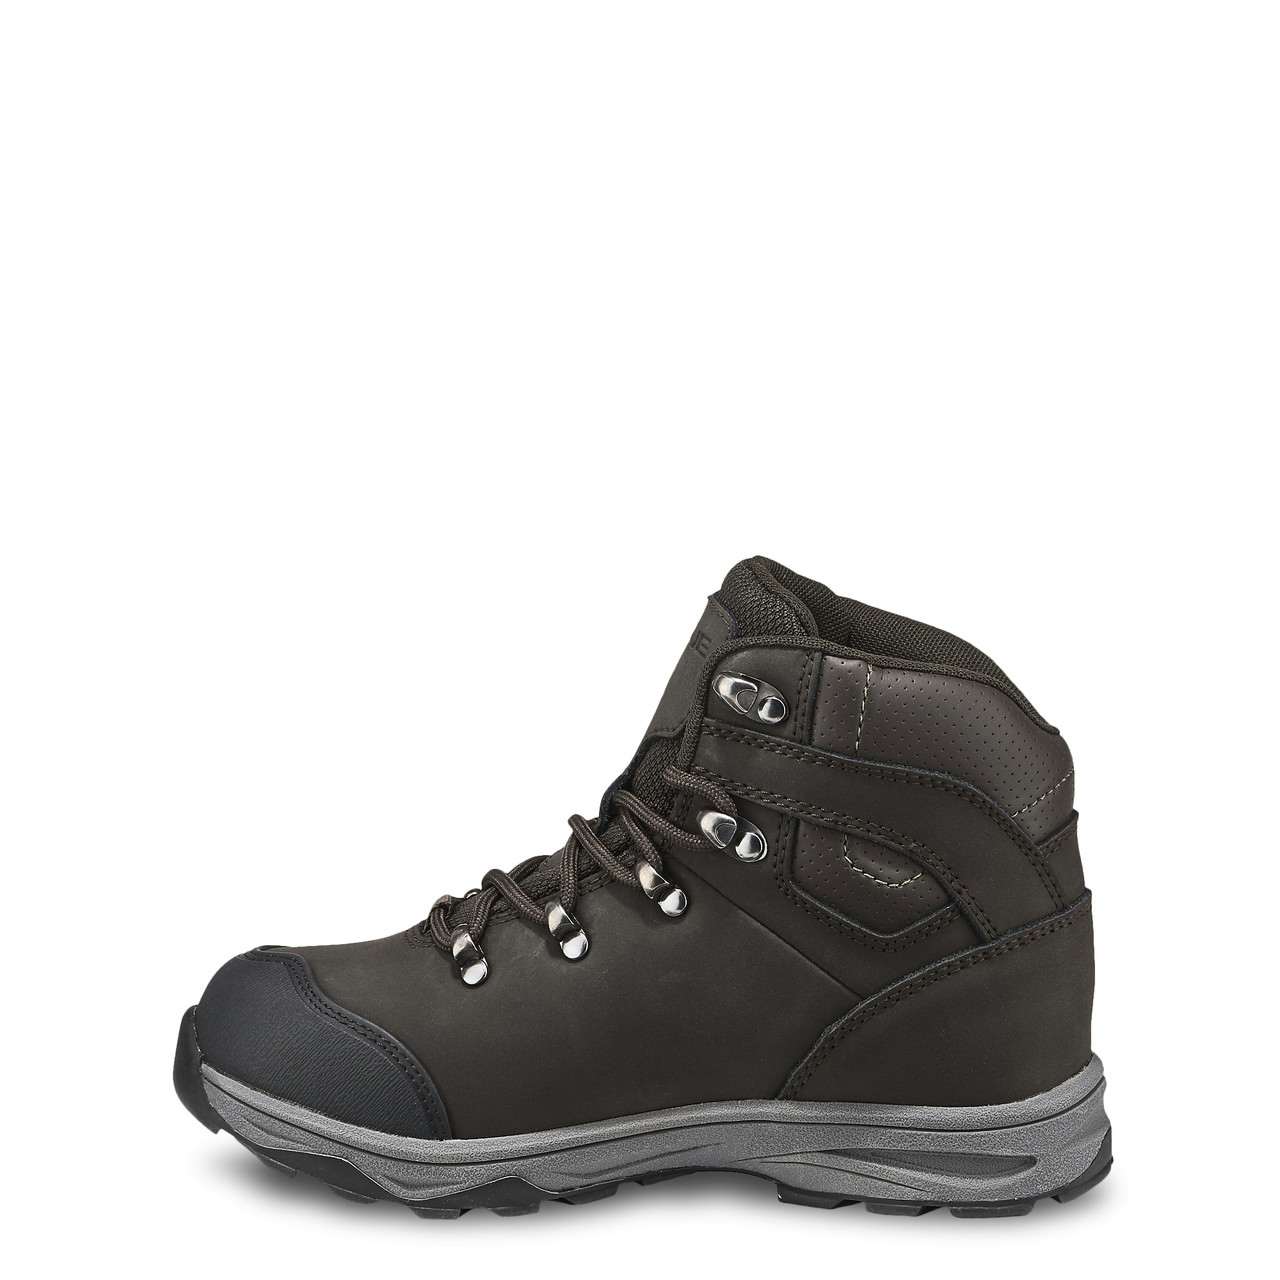 St Elias Ultradry Boots Bungee Cord